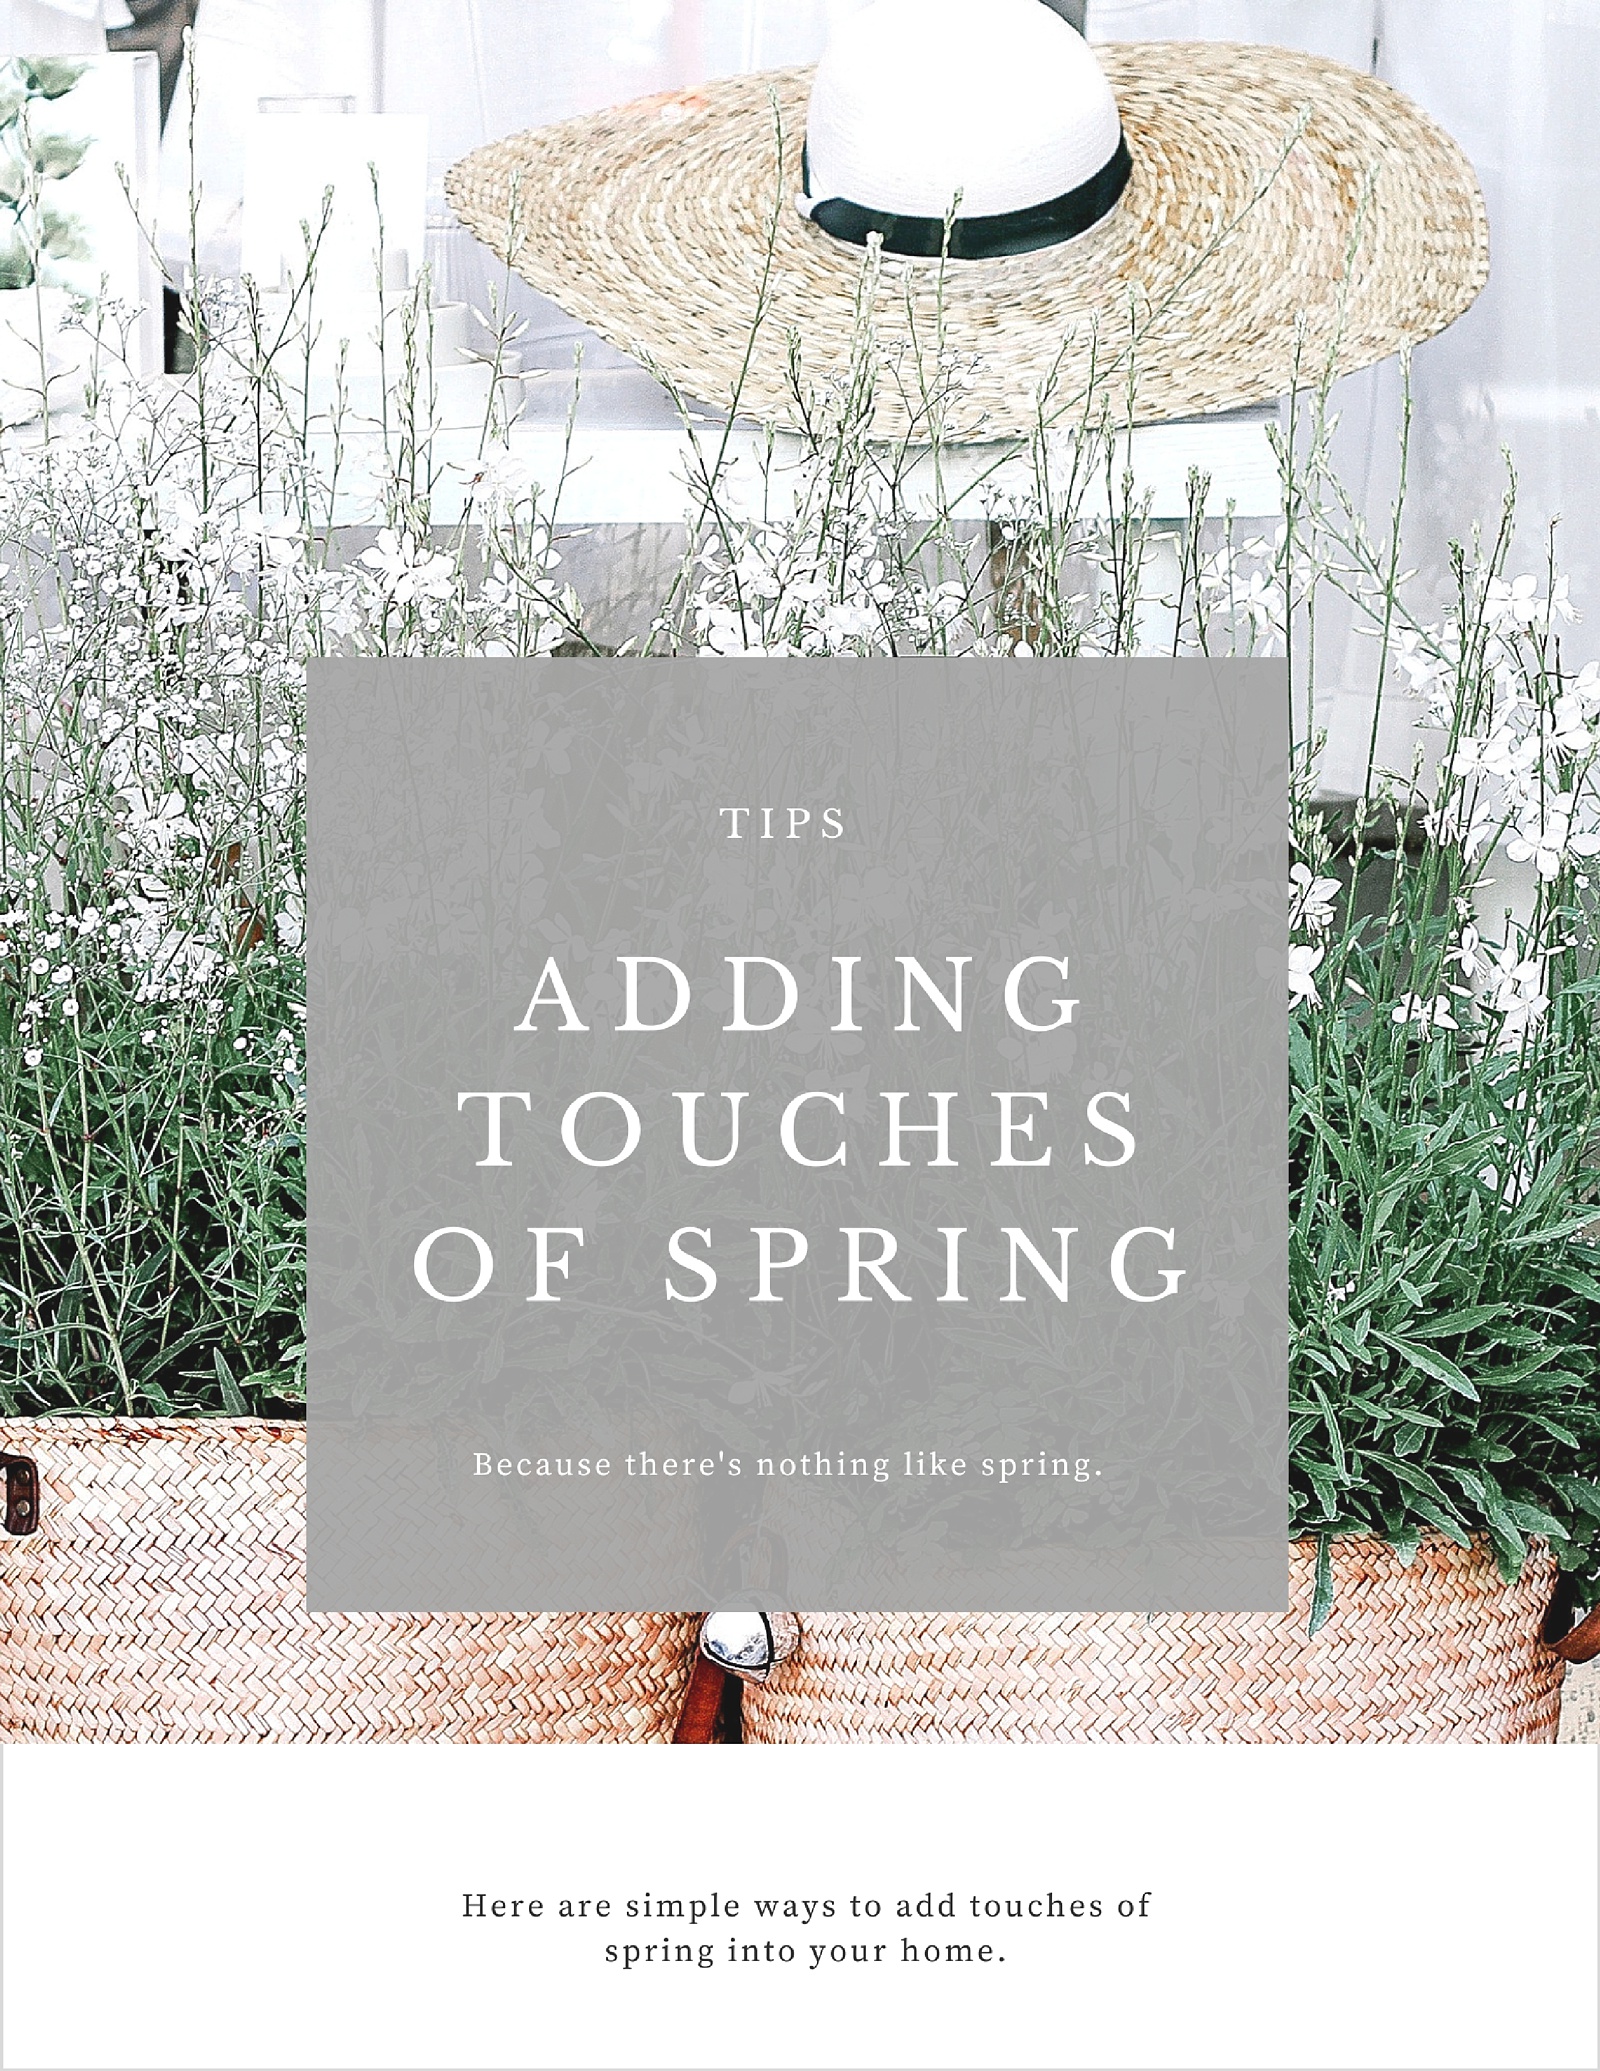 15 Simple Ways to Add Spring to a Home